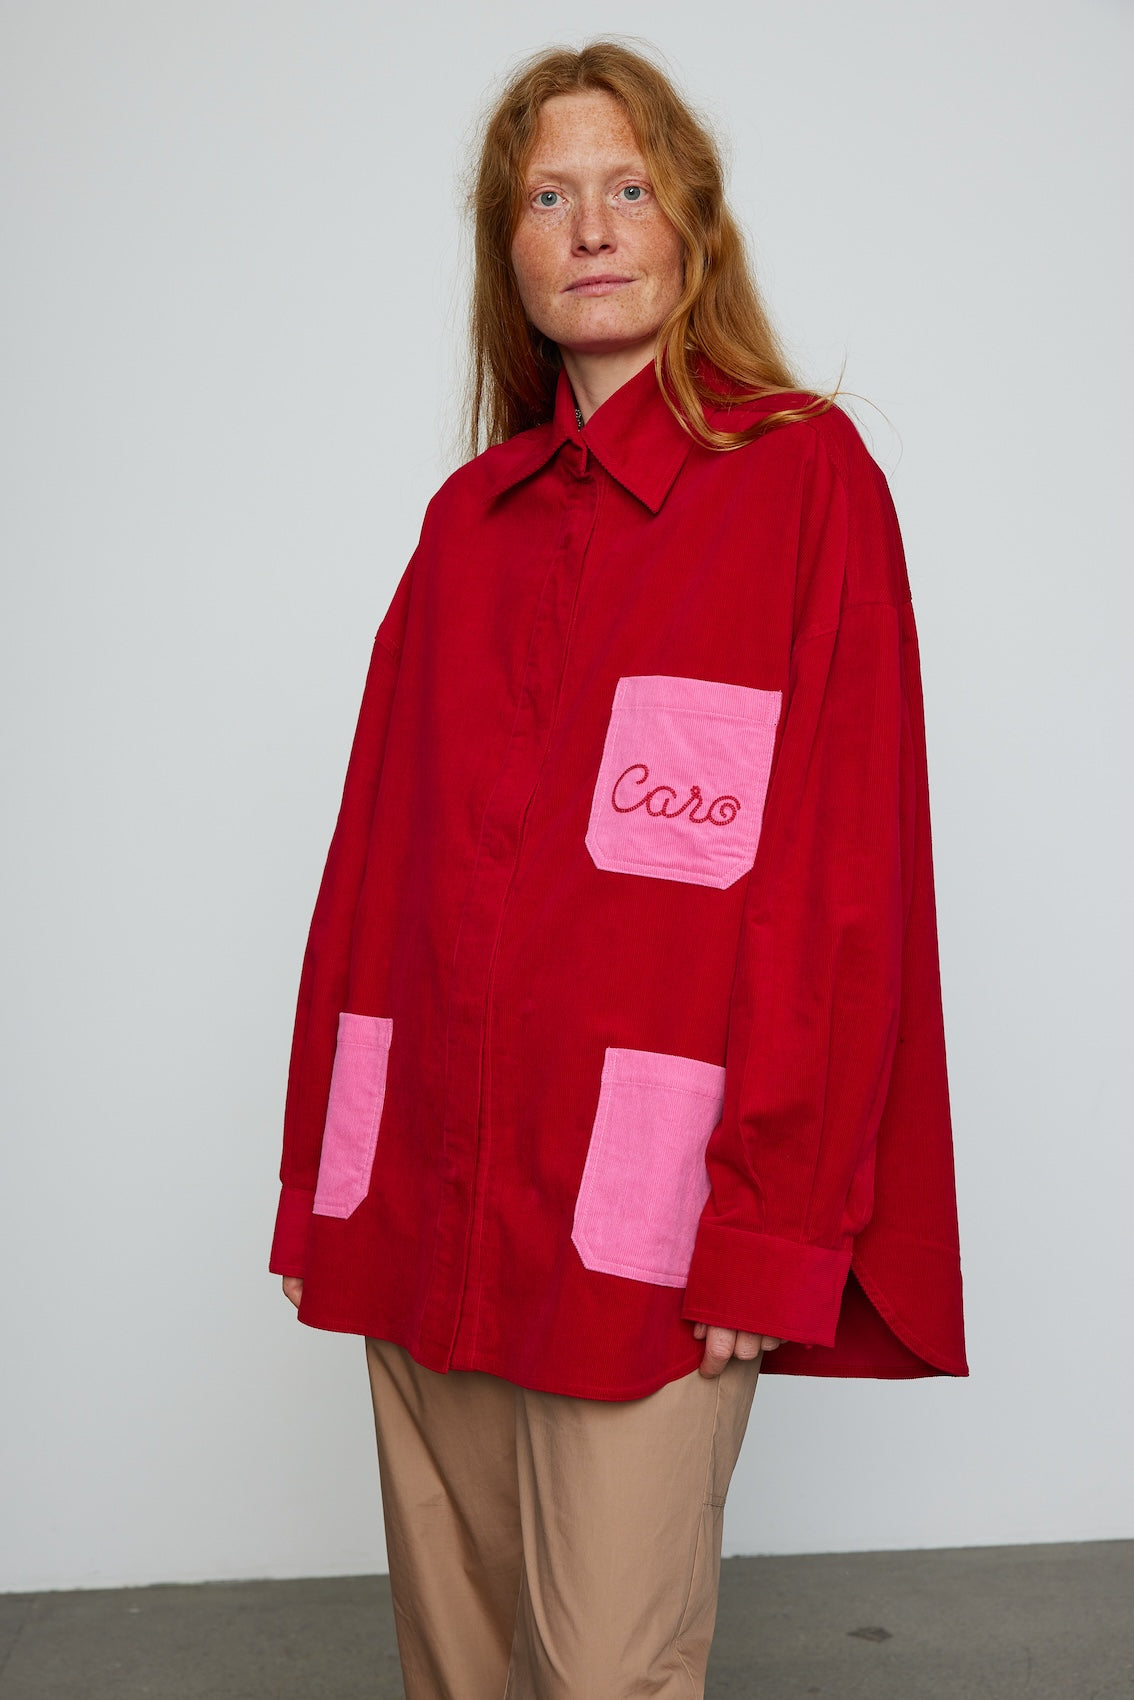 Caro Editions Frederik Shirt is an oversized cotton corduroy style with big sleeves, pink pockets, and an embroidered Caro logo.  Style it open over a dress, tank top, or t-shirt, or wear it buttoned-up.